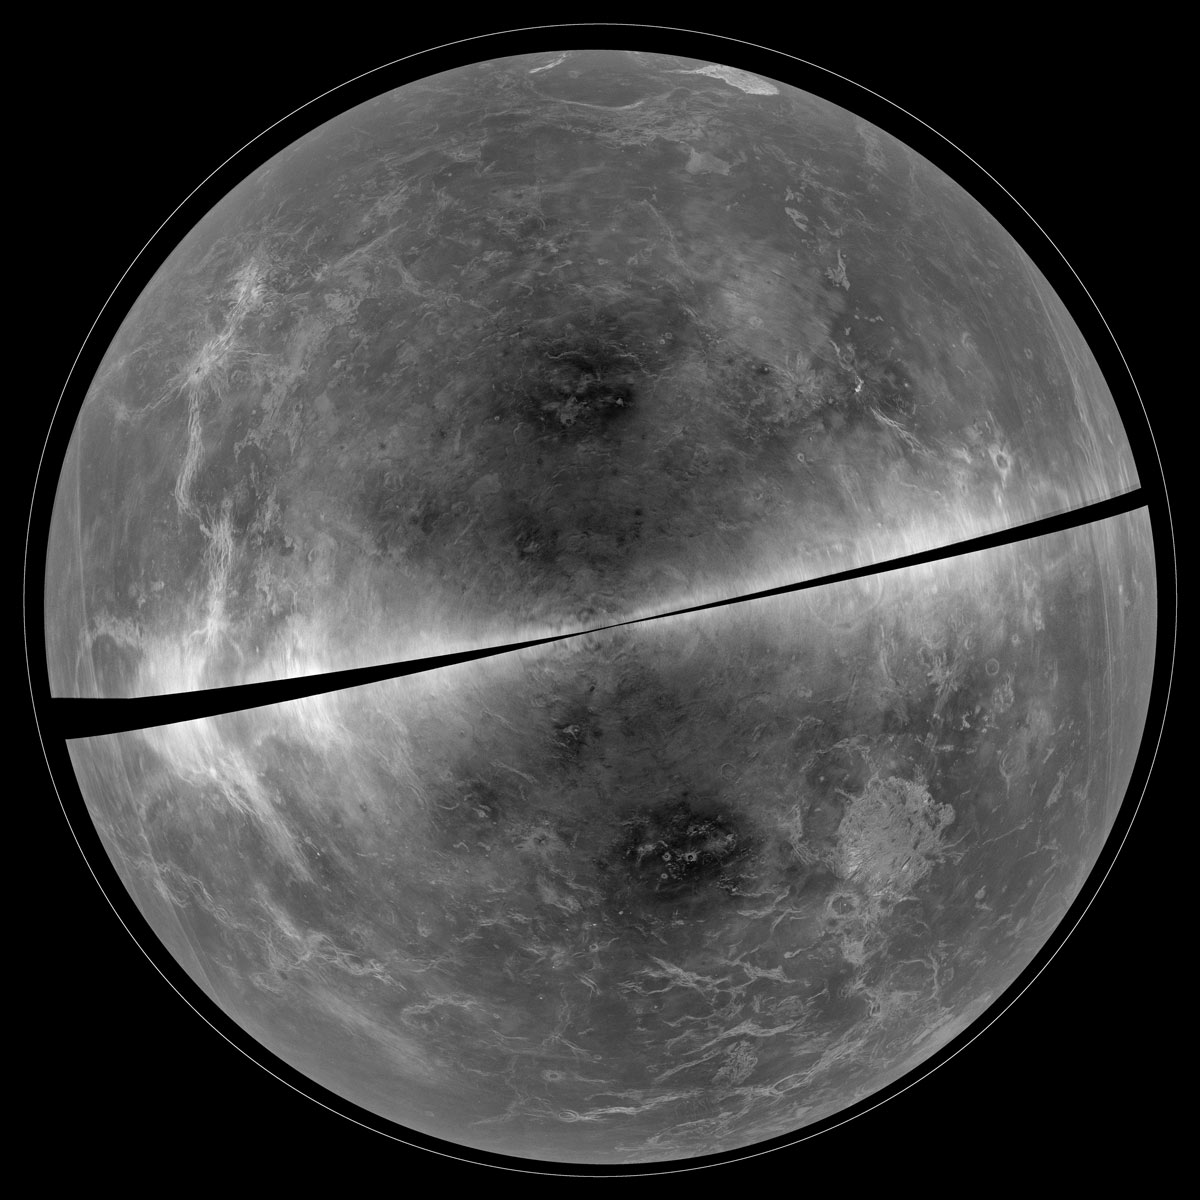 Image Release: Venus, If You Will, as Seen in Radar with the GBT